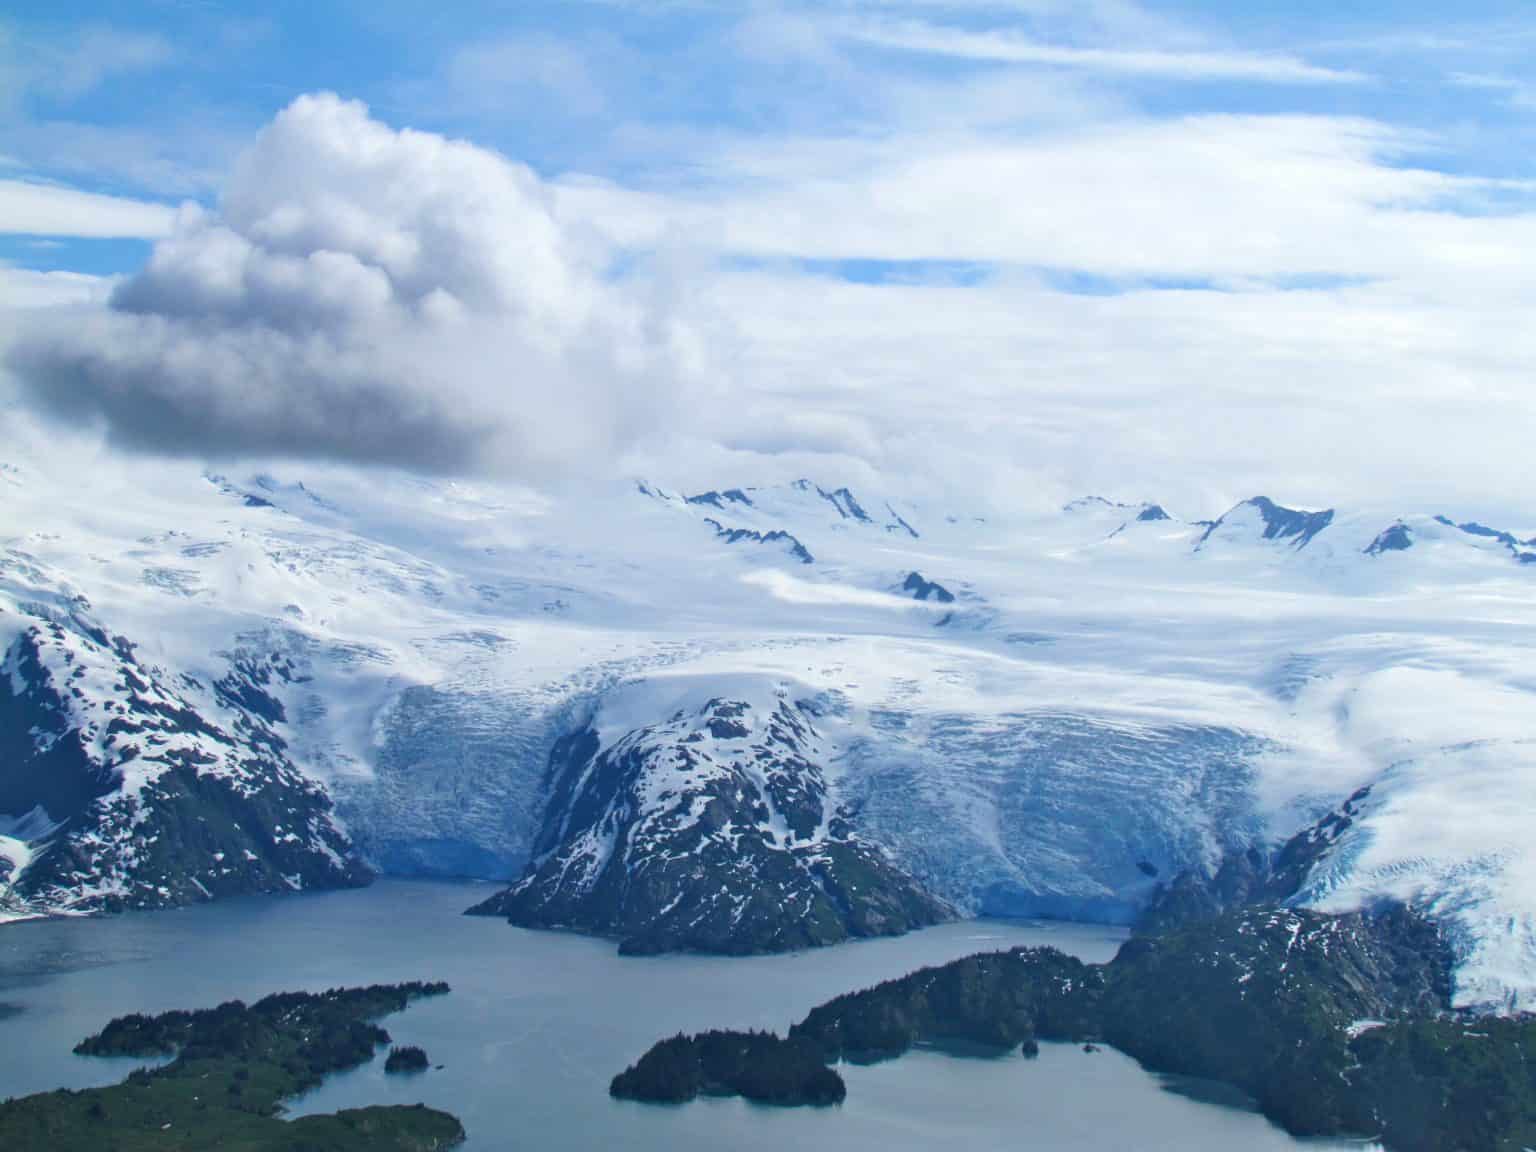 Two glaciers meet a fjord. Cloudy skies with sunshine.